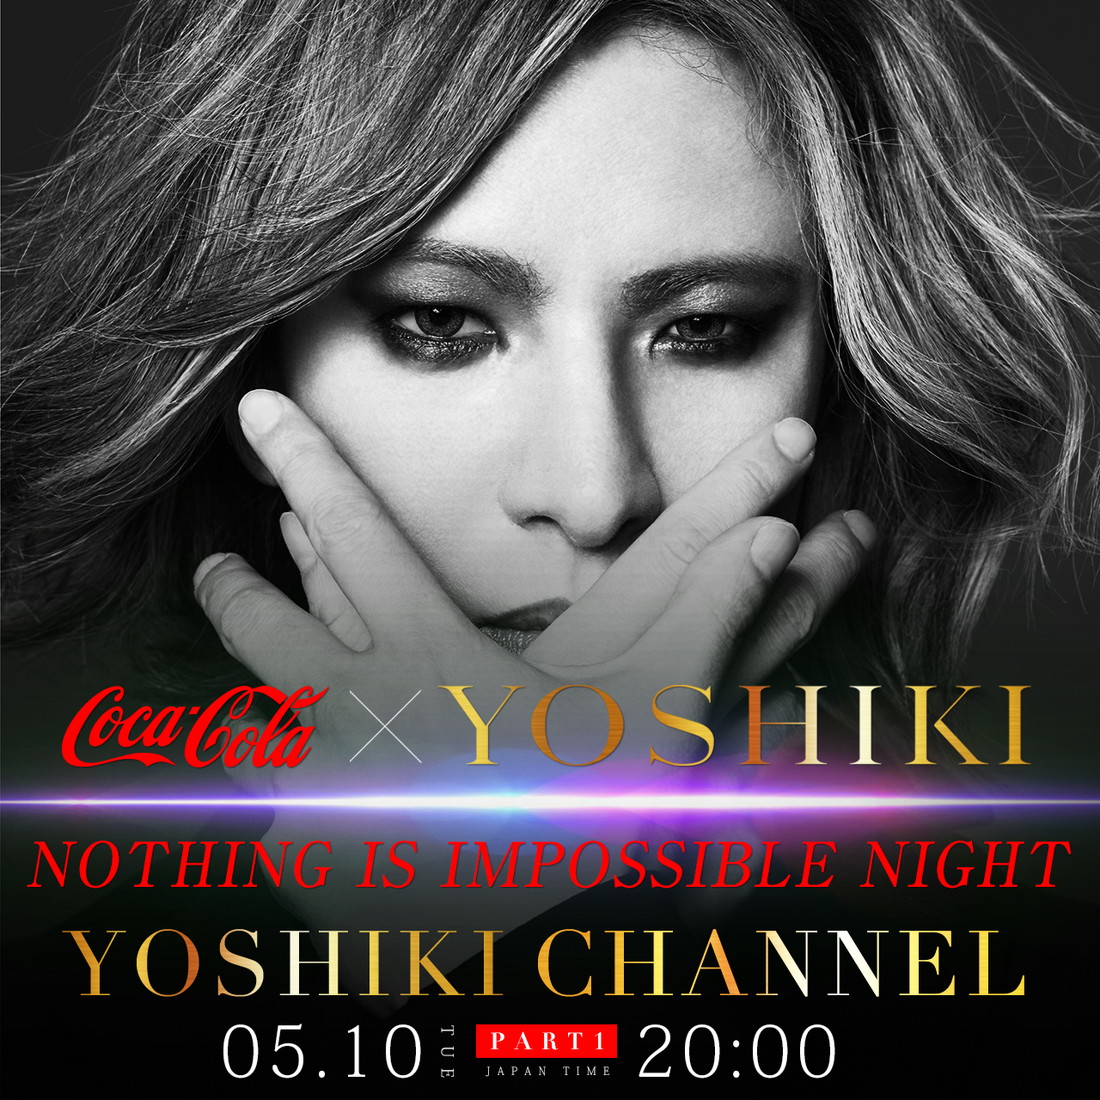 YOSHIKI出演の配信イベント『NOTHING IS IMPOSSIBLE NIGHT』ゲストにEXITとNovelbrightが決定 - 画像一覧（1/1）